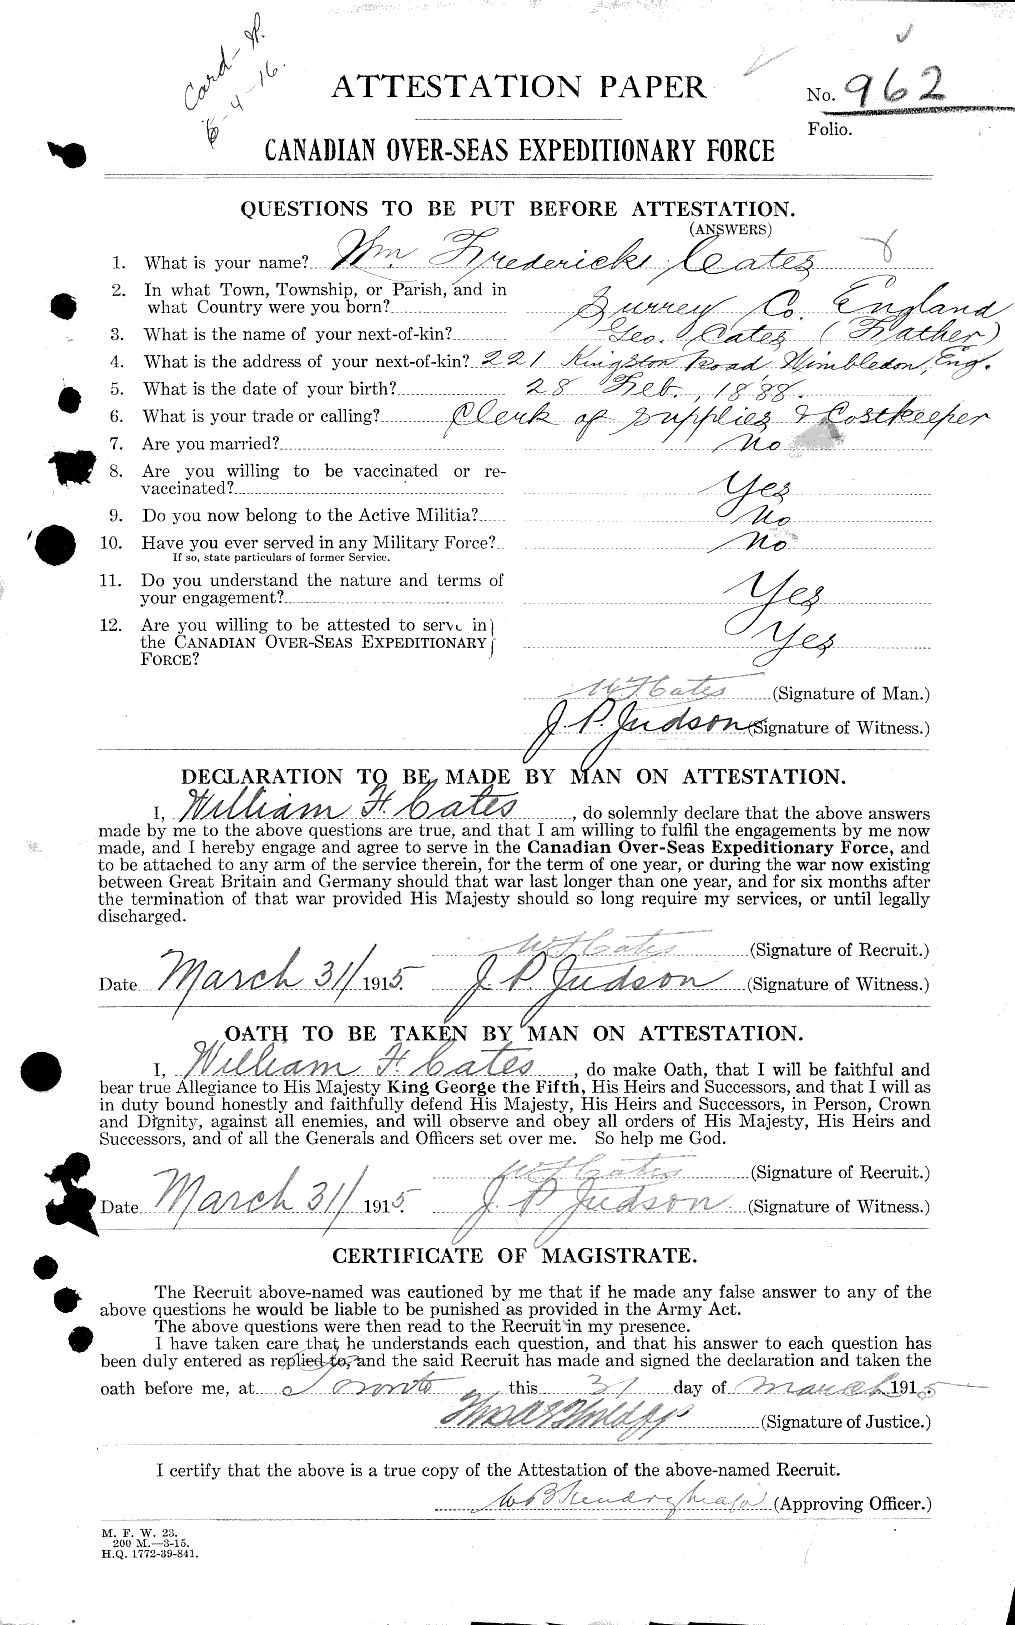 Personnel Records of the First World War - CEF 013229a